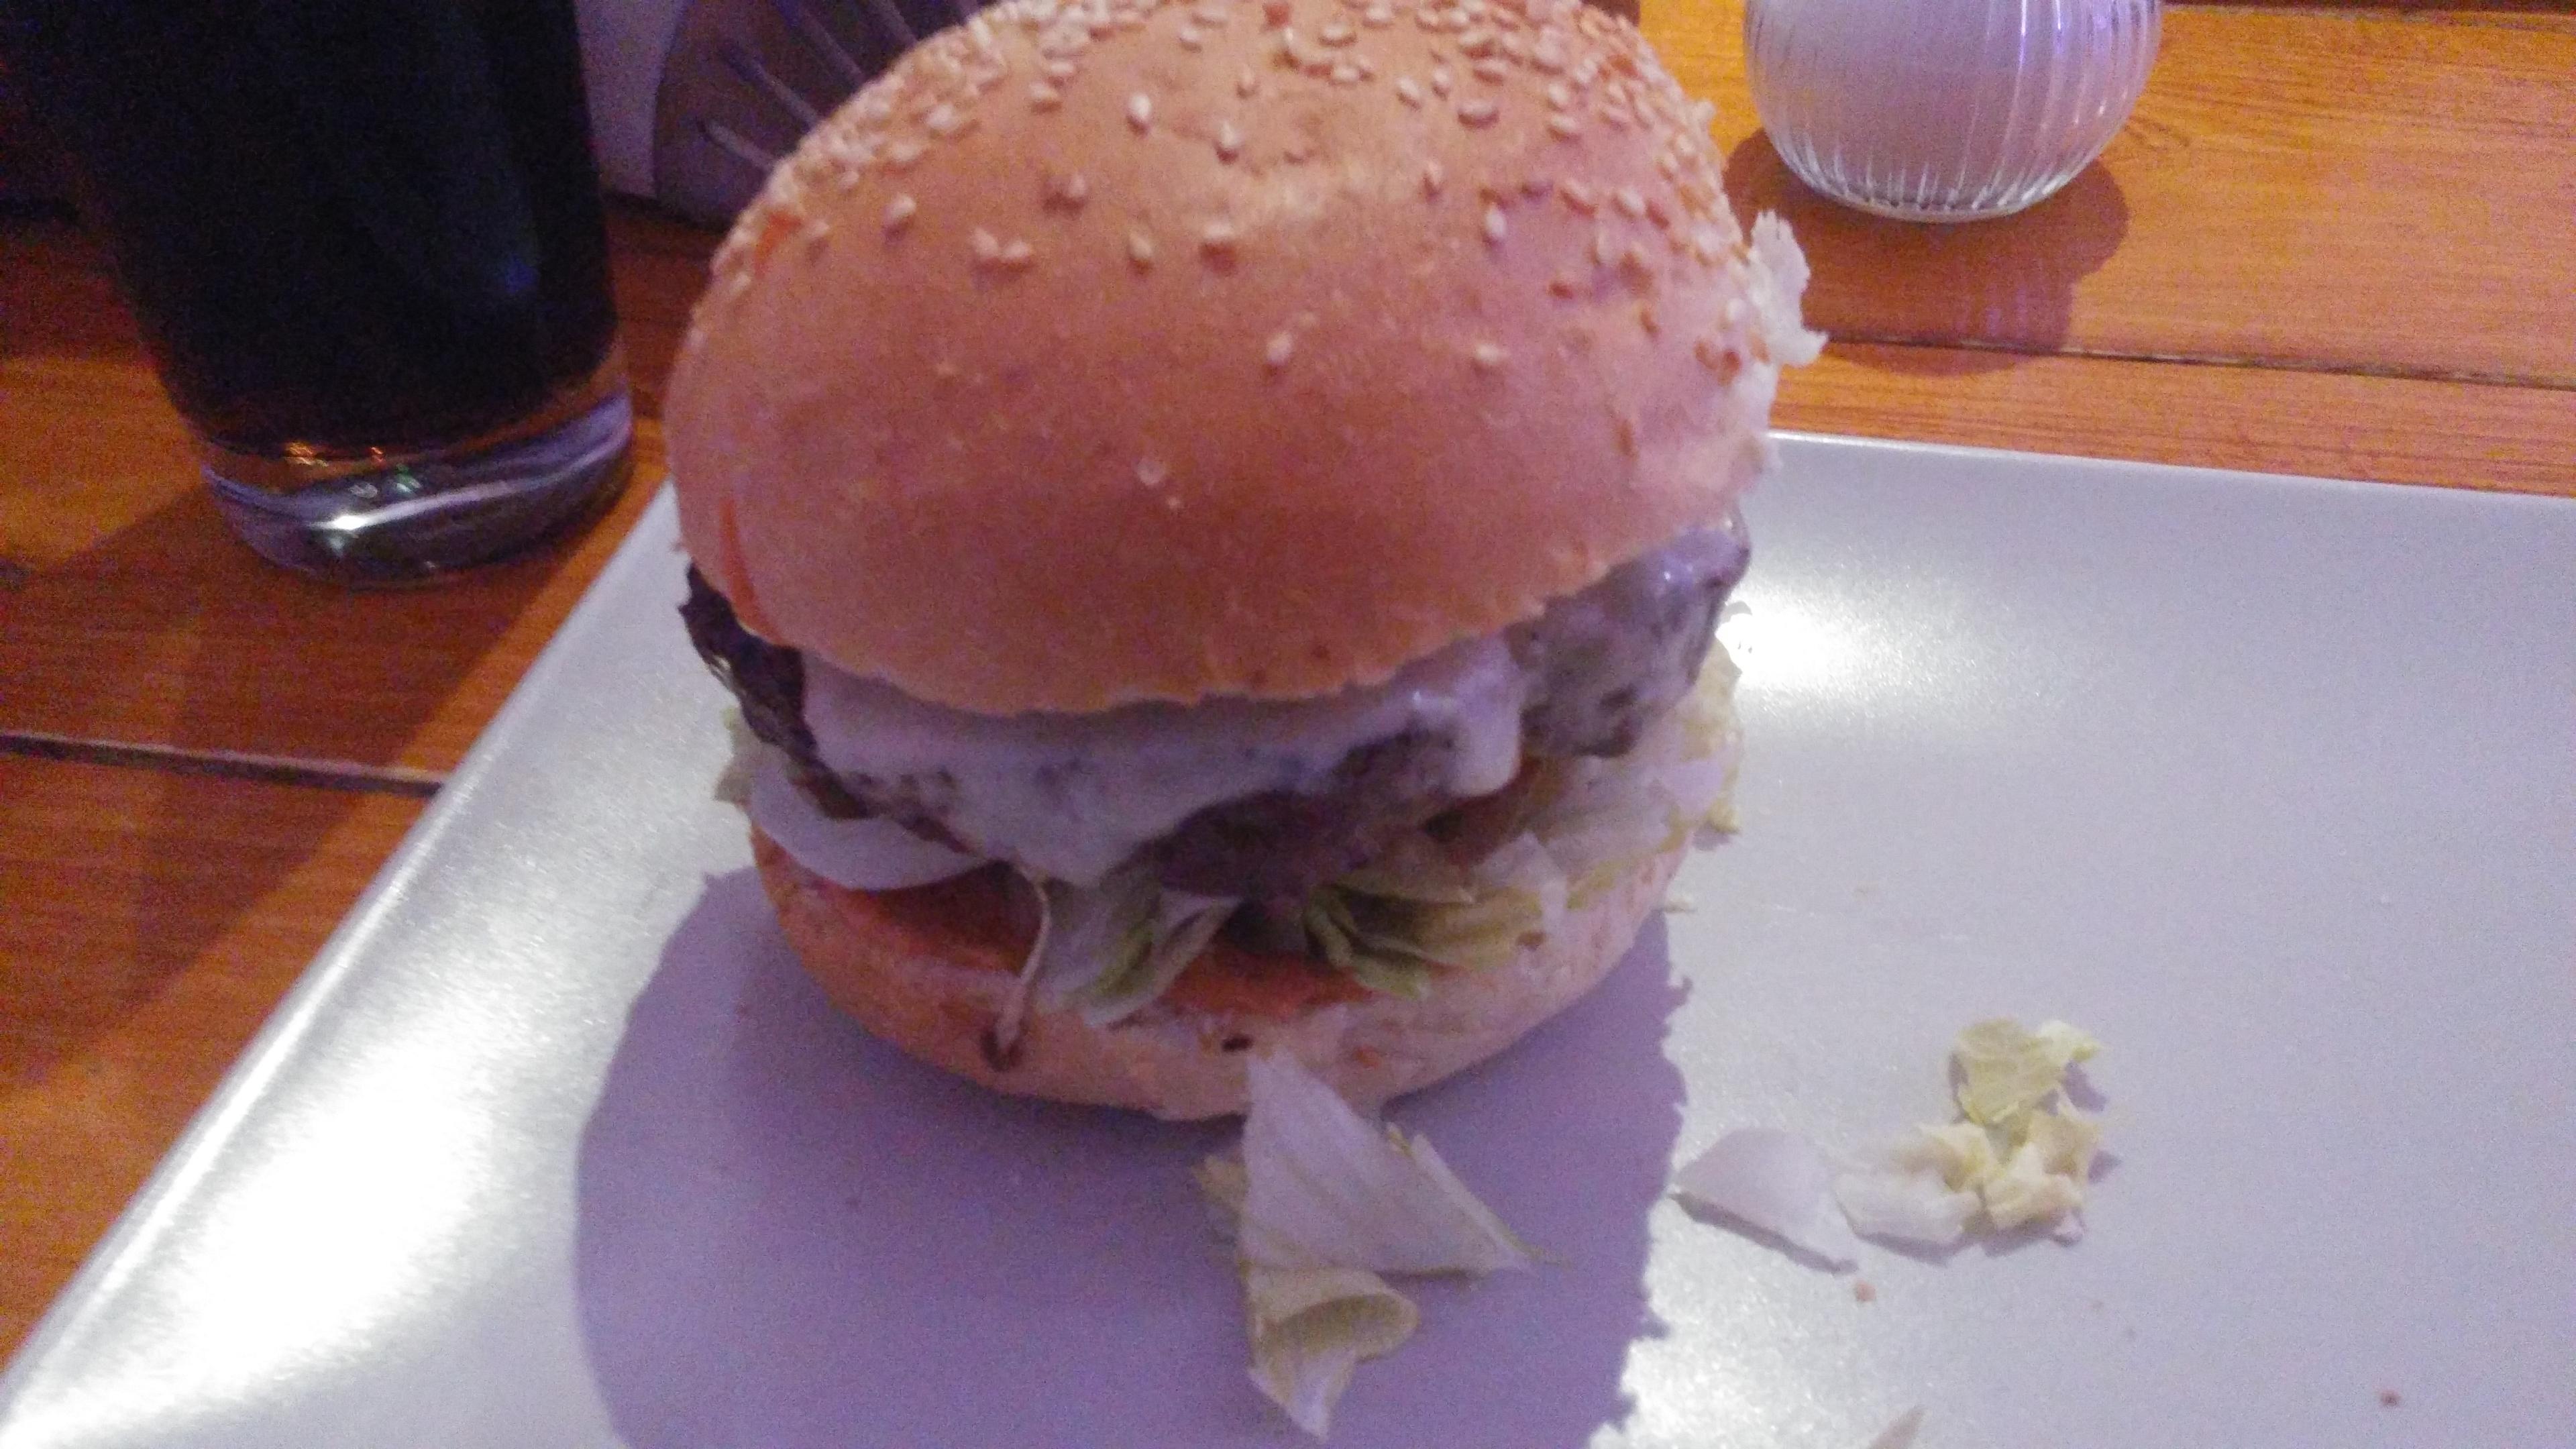 Cover image of this place taste my BURGER